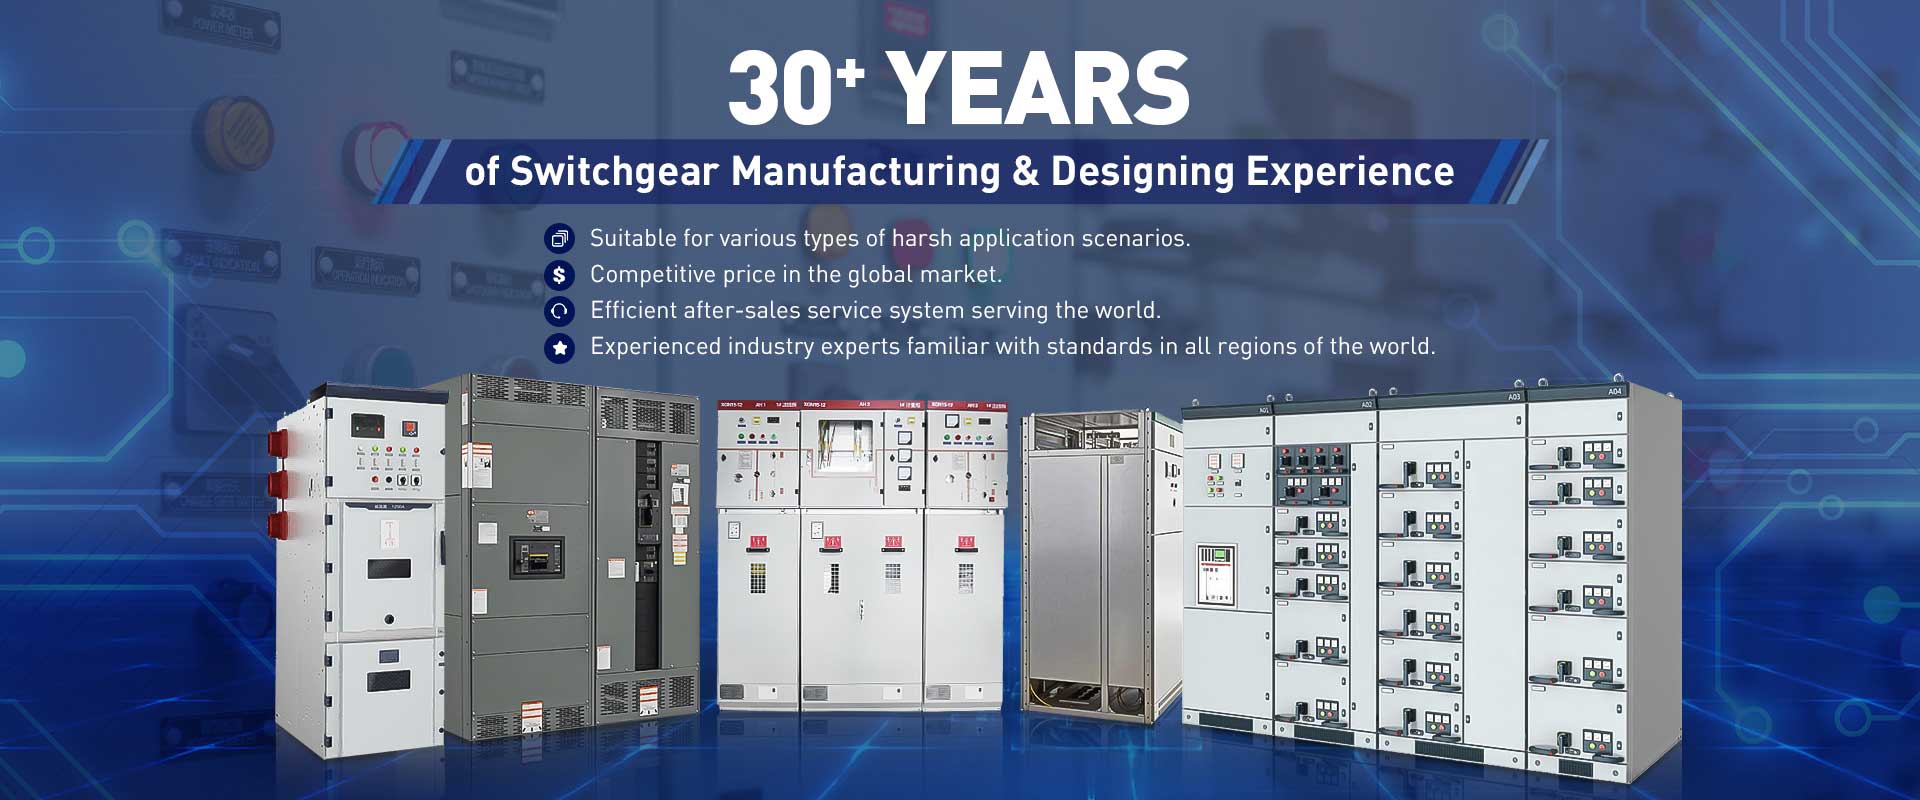 Switchgear Manufacturing Company from China